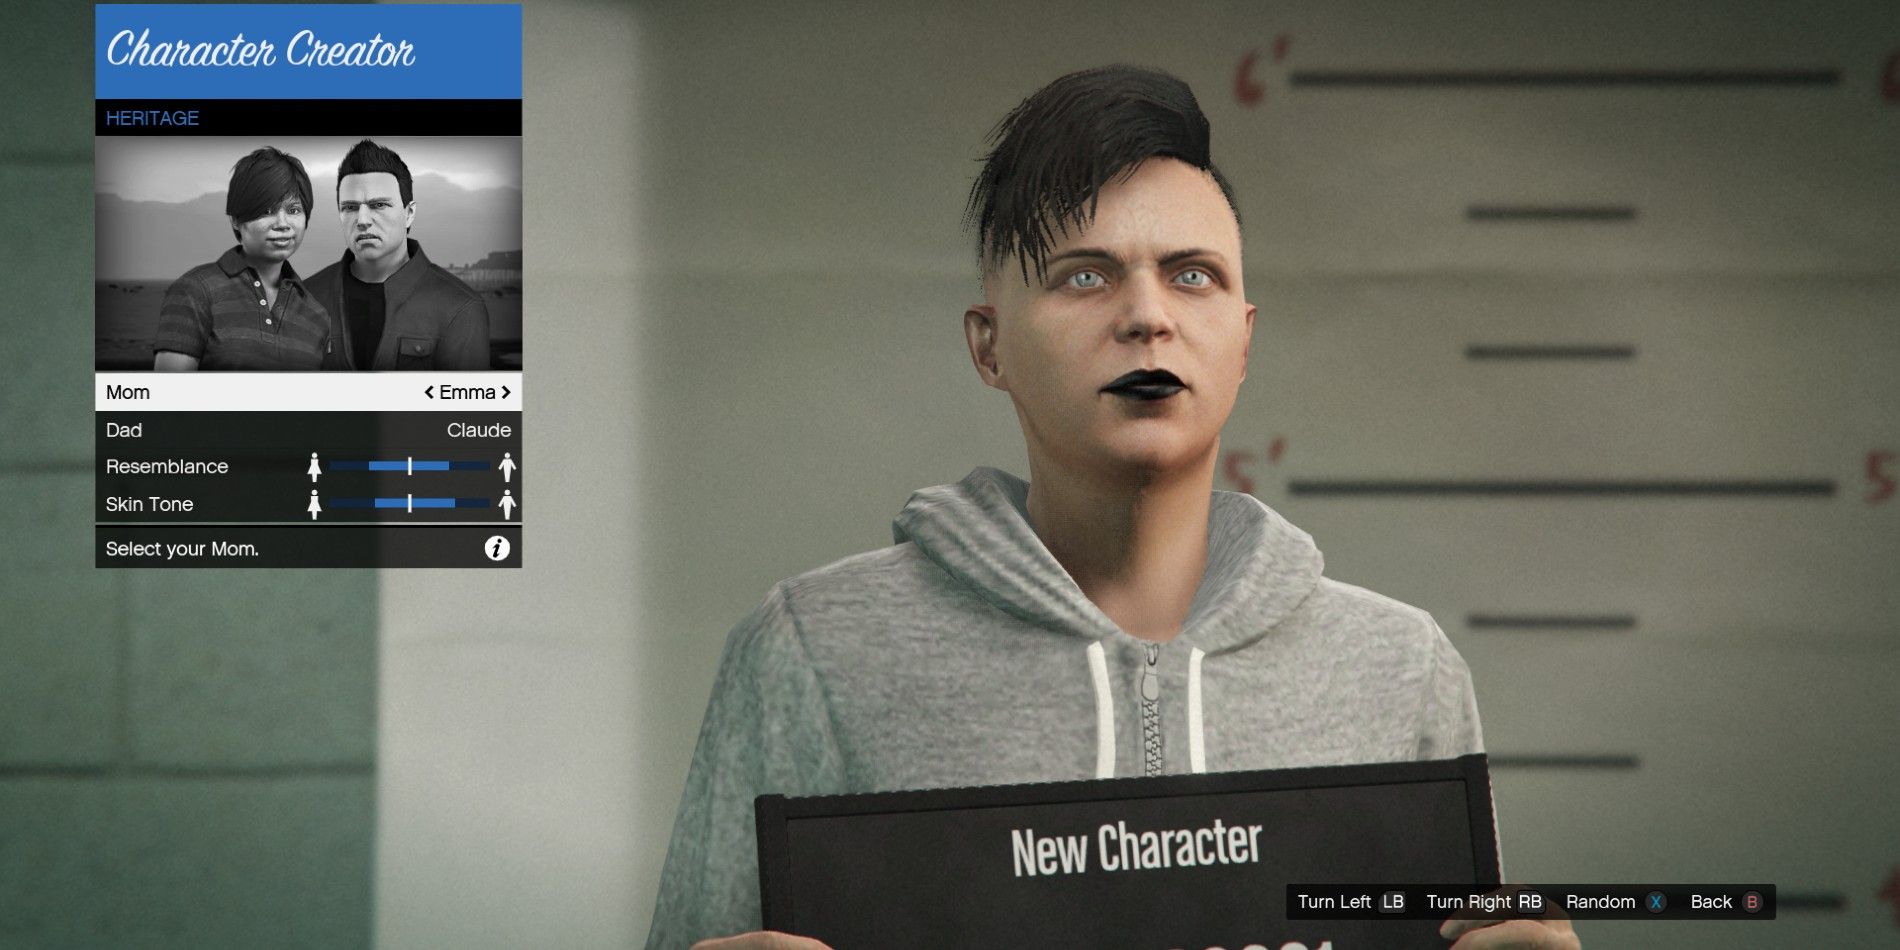 Grand Theft Auto Online's Heritage mechanics as they're shown during new character creation, where the characters parents are shown in a photo in the corner of the screen.